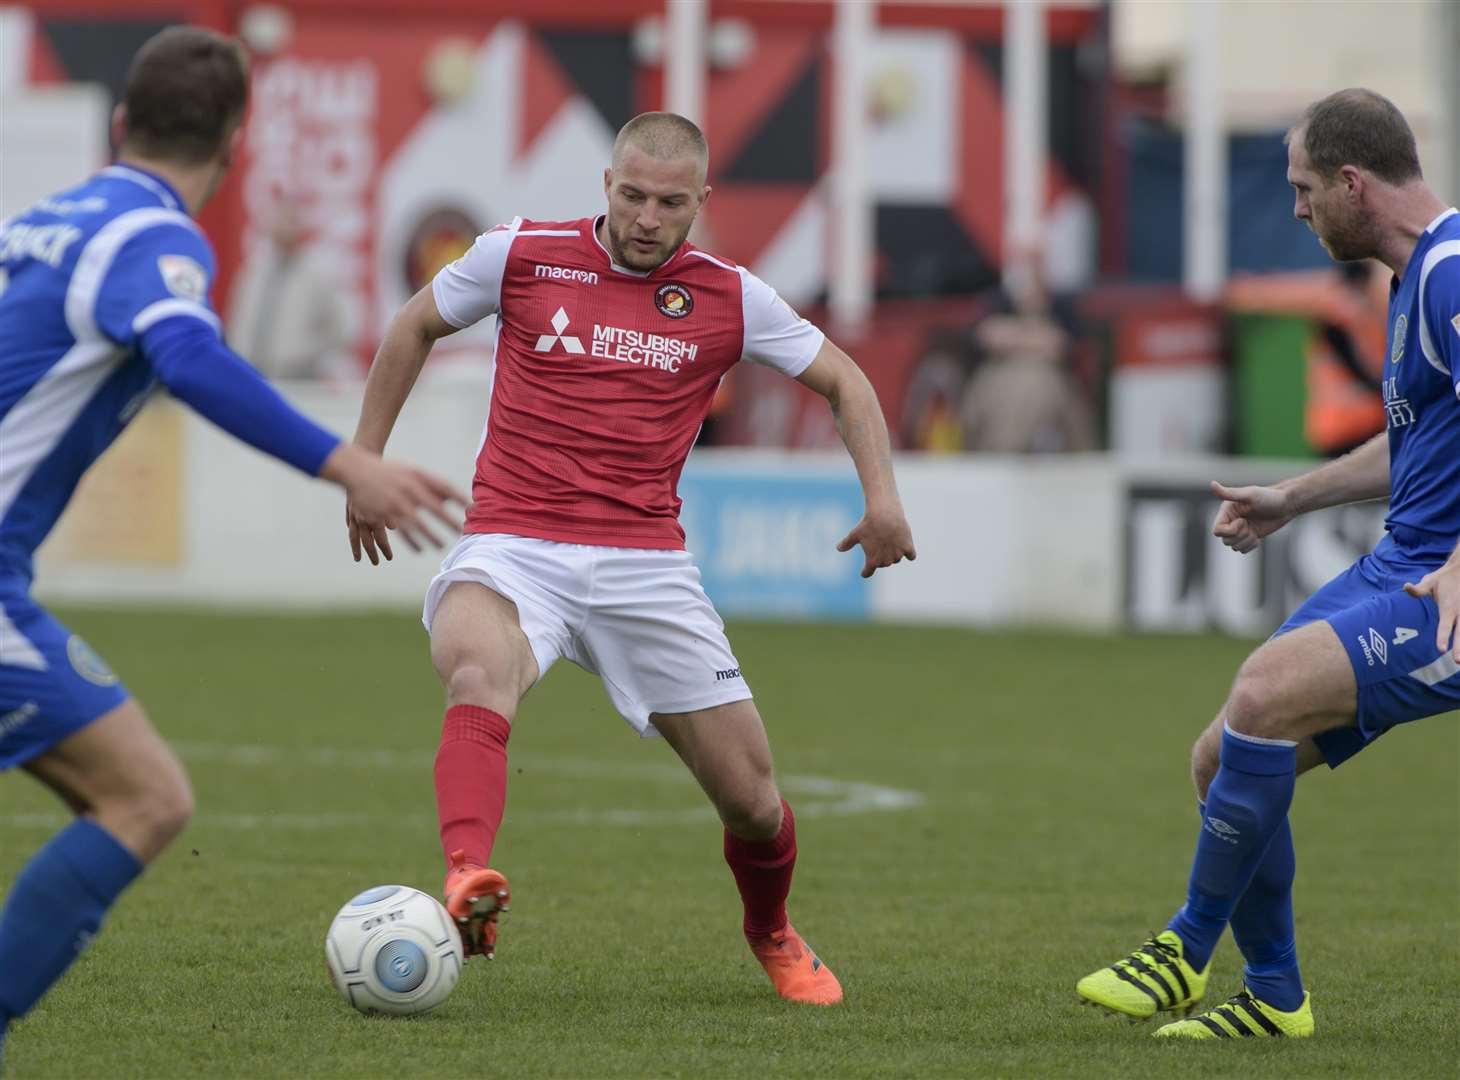 Luke Coulson takes on two Macclesfield players Picture: Andy Payton